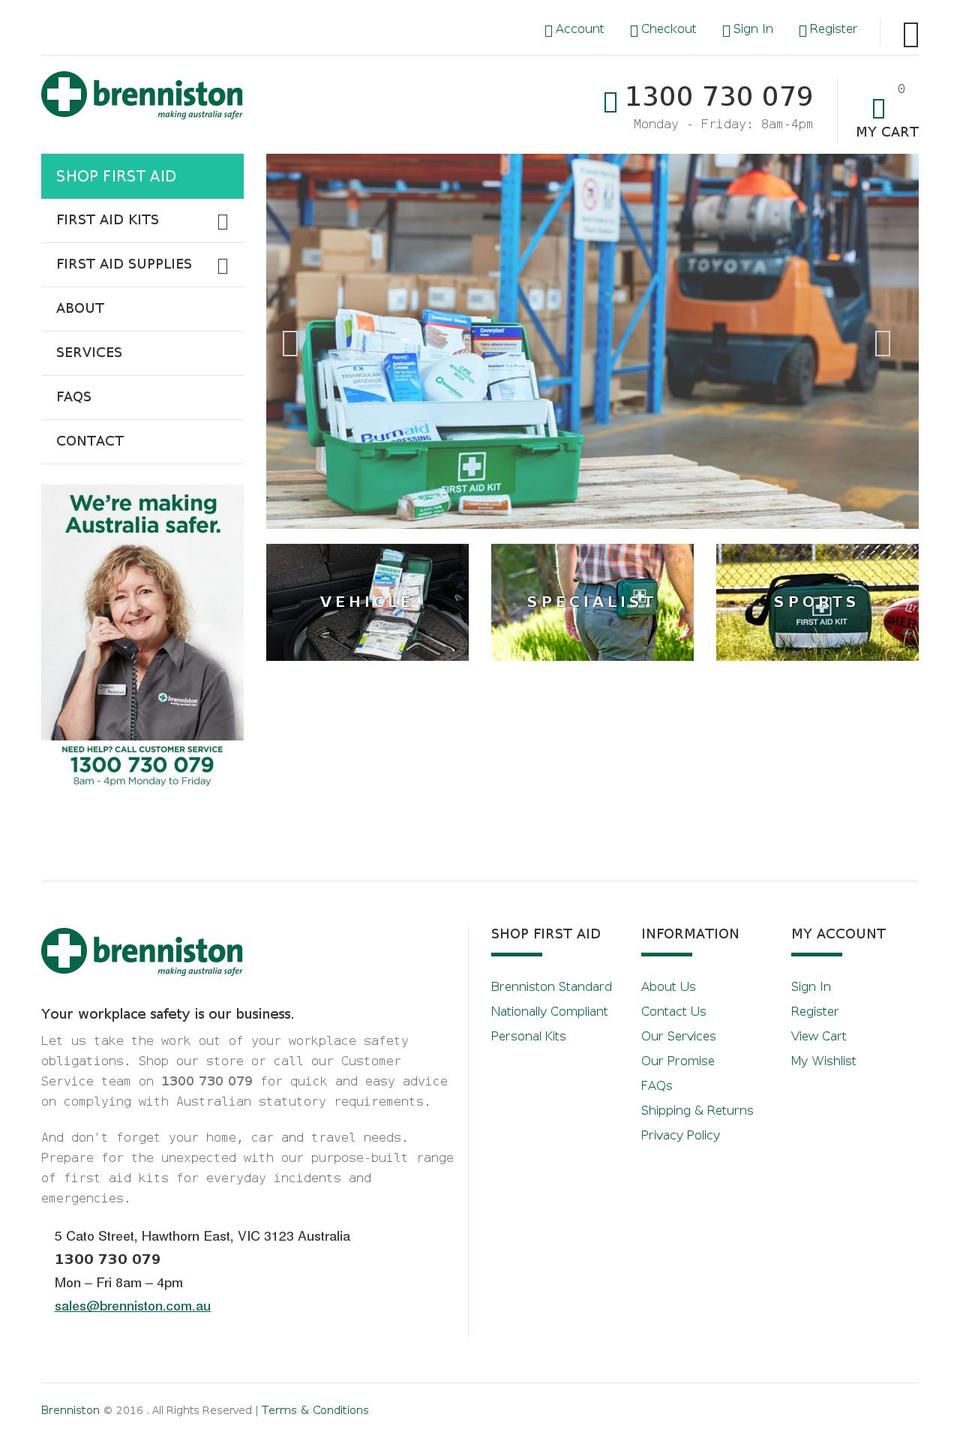 yourstore-v1-4-4 Shopify theme site example brenniston.com.au